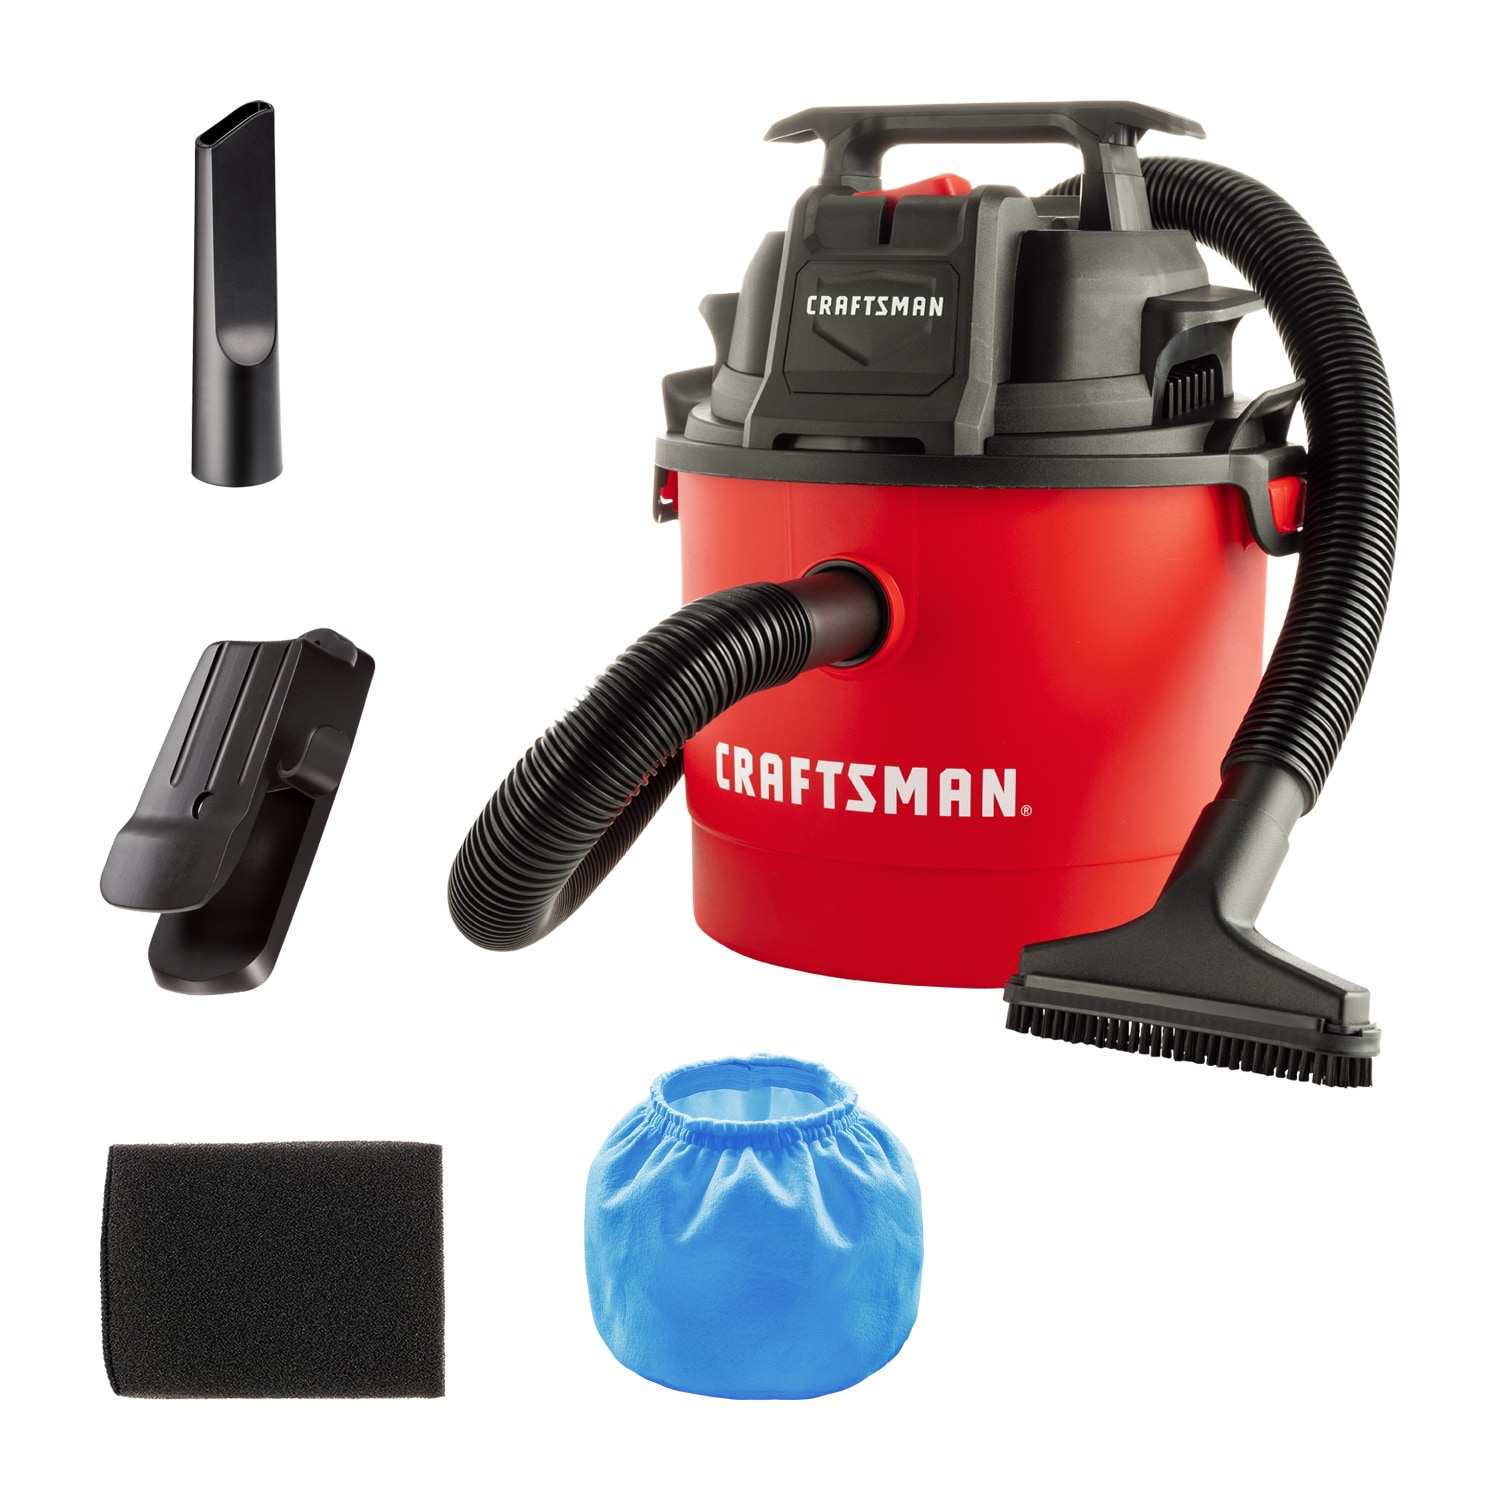 VacMaster 2.5-Gallons 2-HP Corded Wet/Dry Shop Vacuum with Accessories  Included in the Shop Vacuums department at